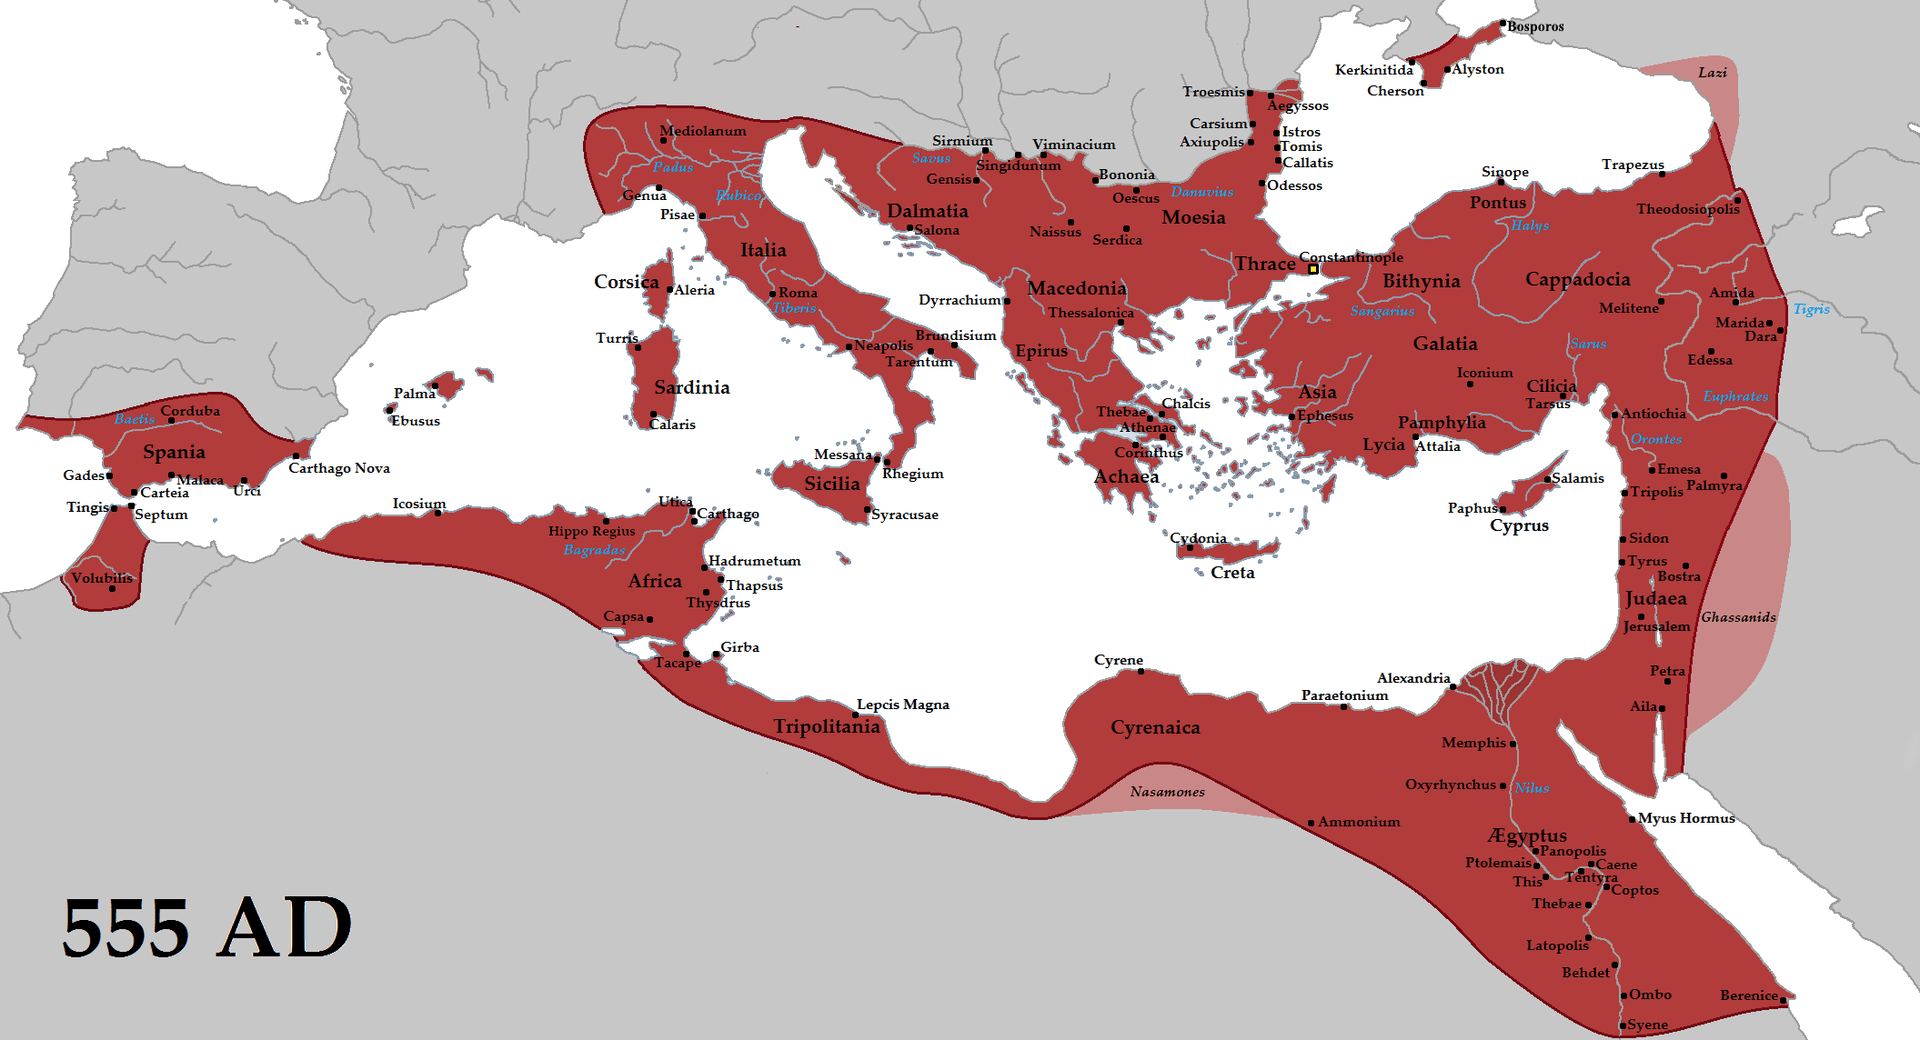 The Empire at its greatest extent under Justinian I, in 555 AD.